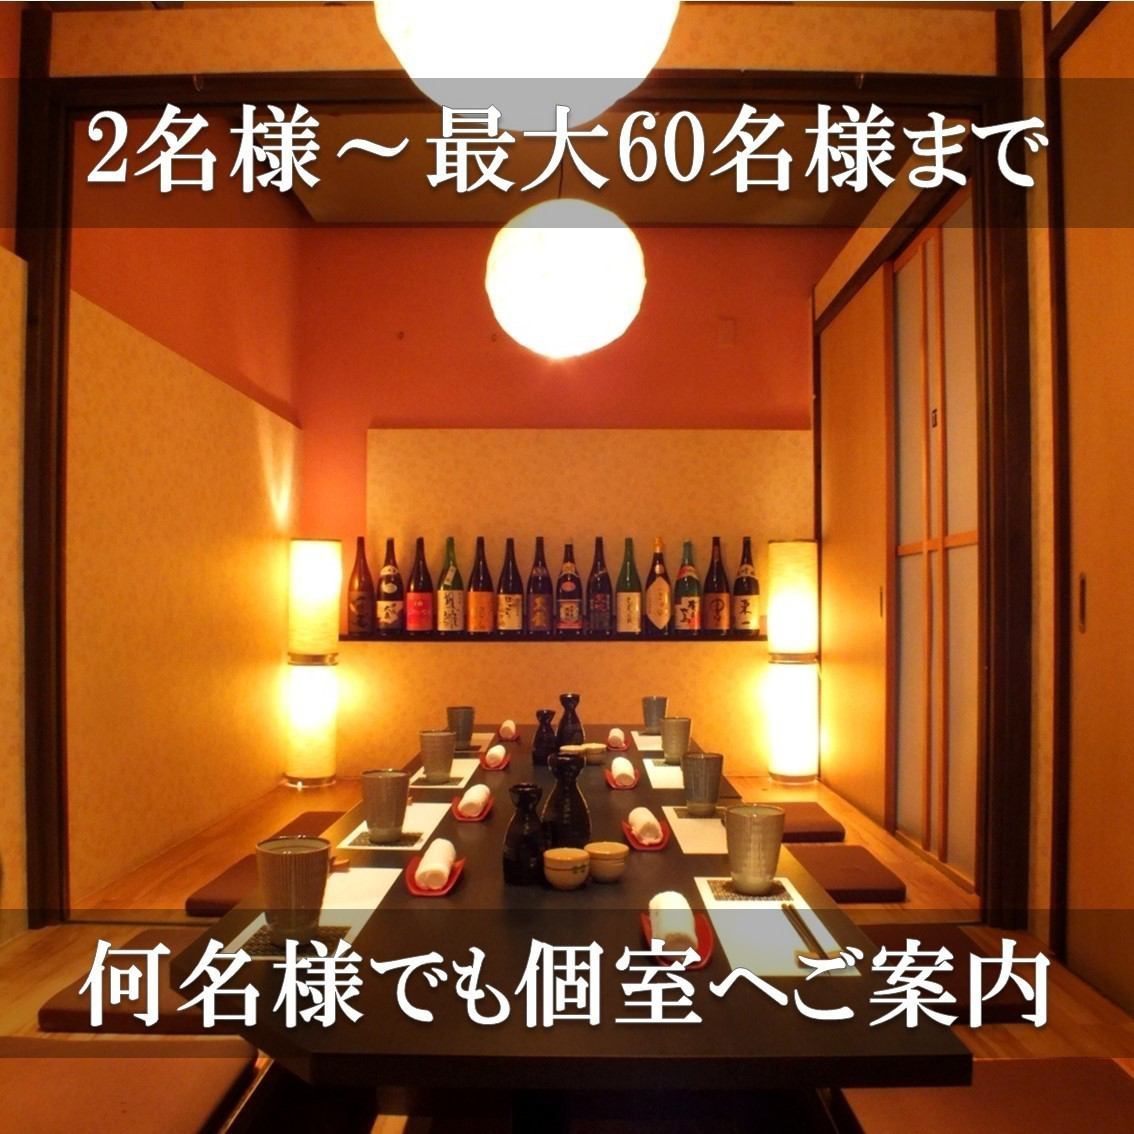 Completely private room ◆Seafood boatload ~ with tuna ~ with sake.